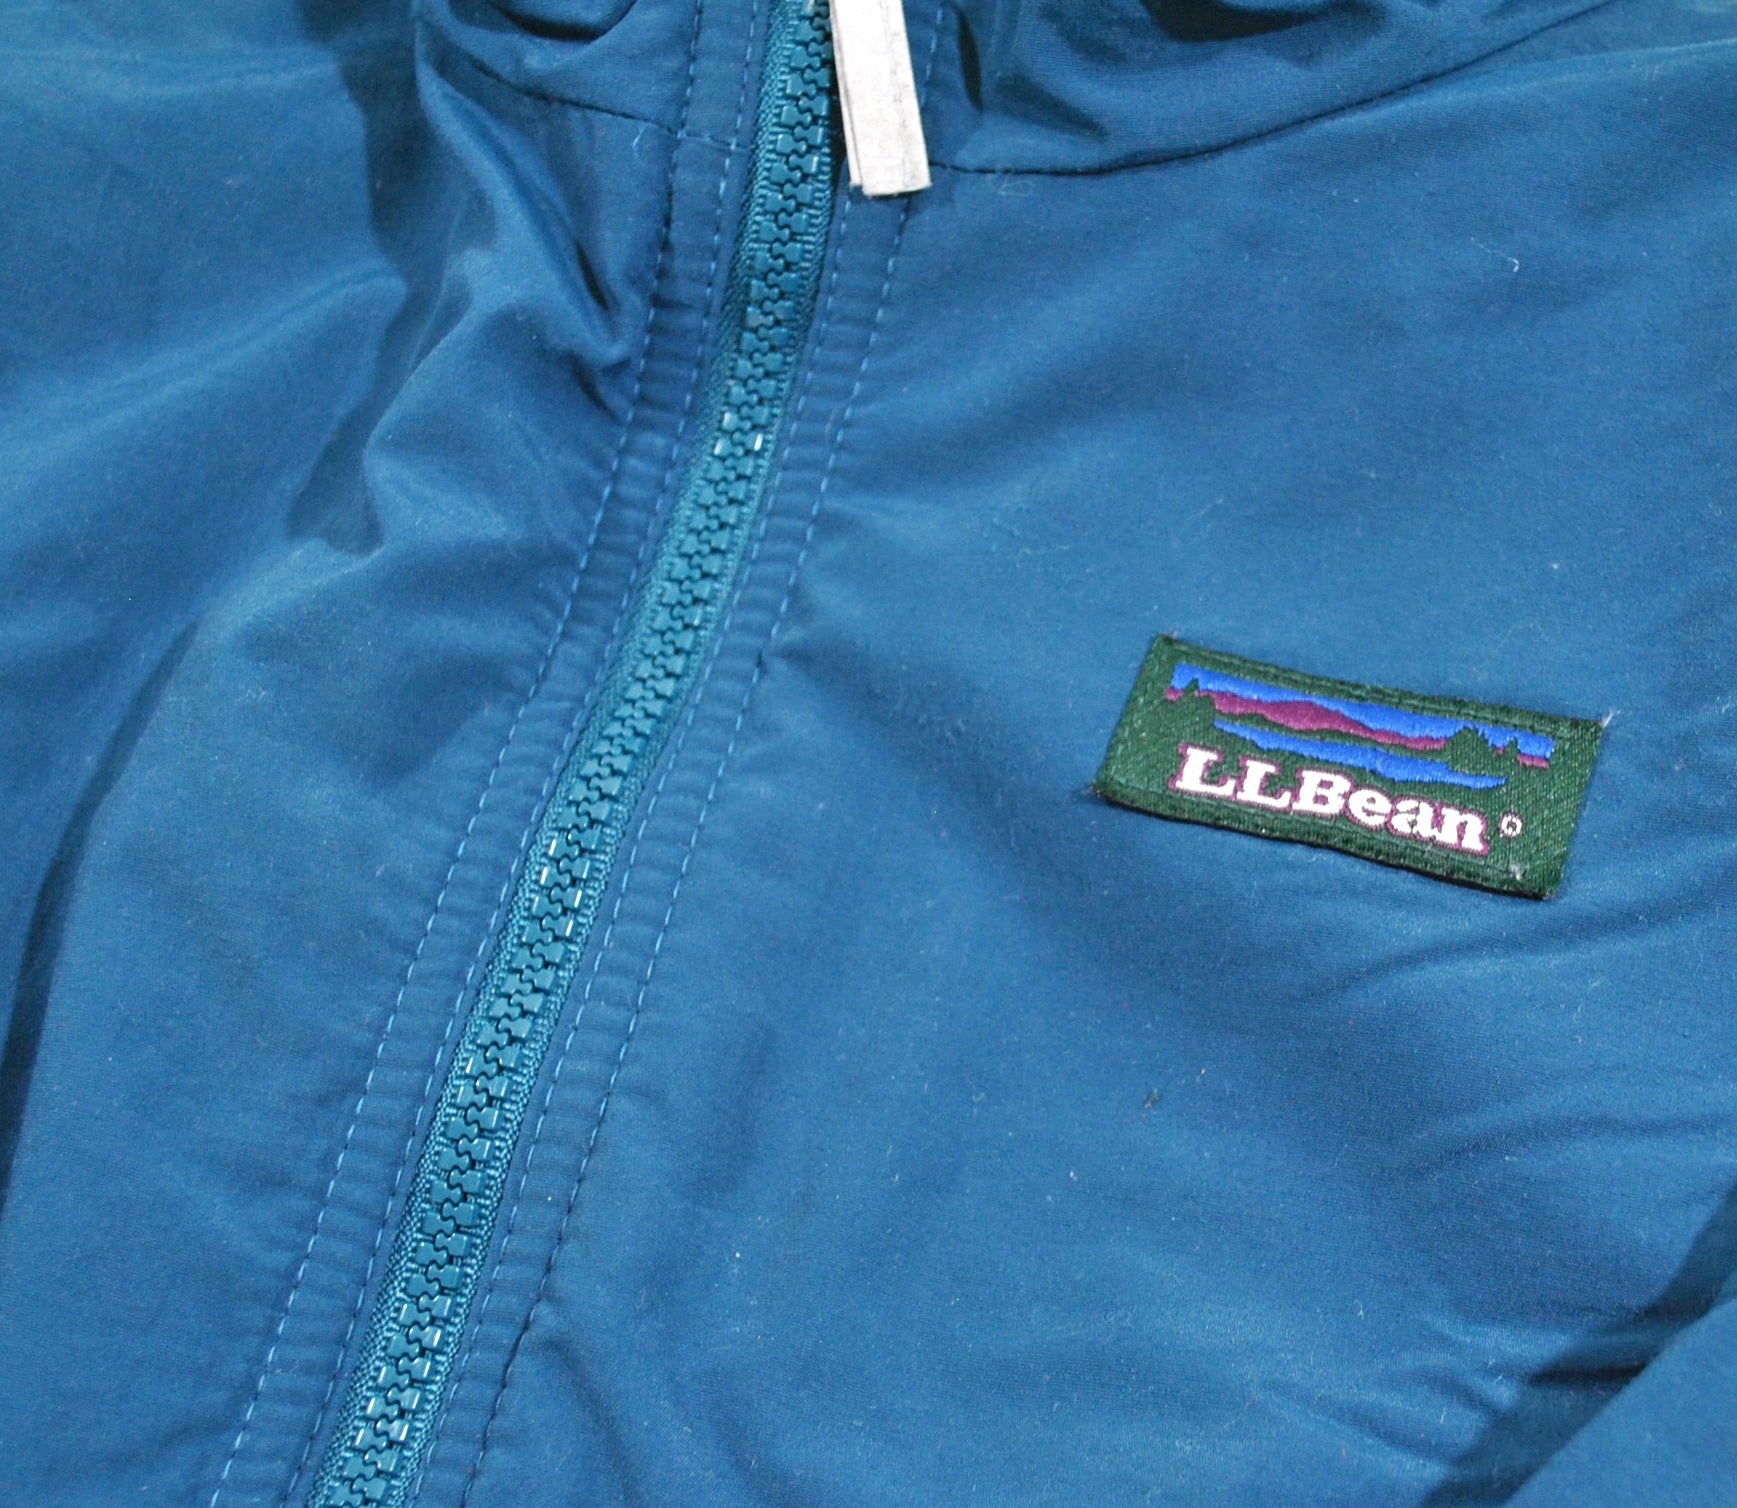 Retro Jacket with Patch – The Human Bean